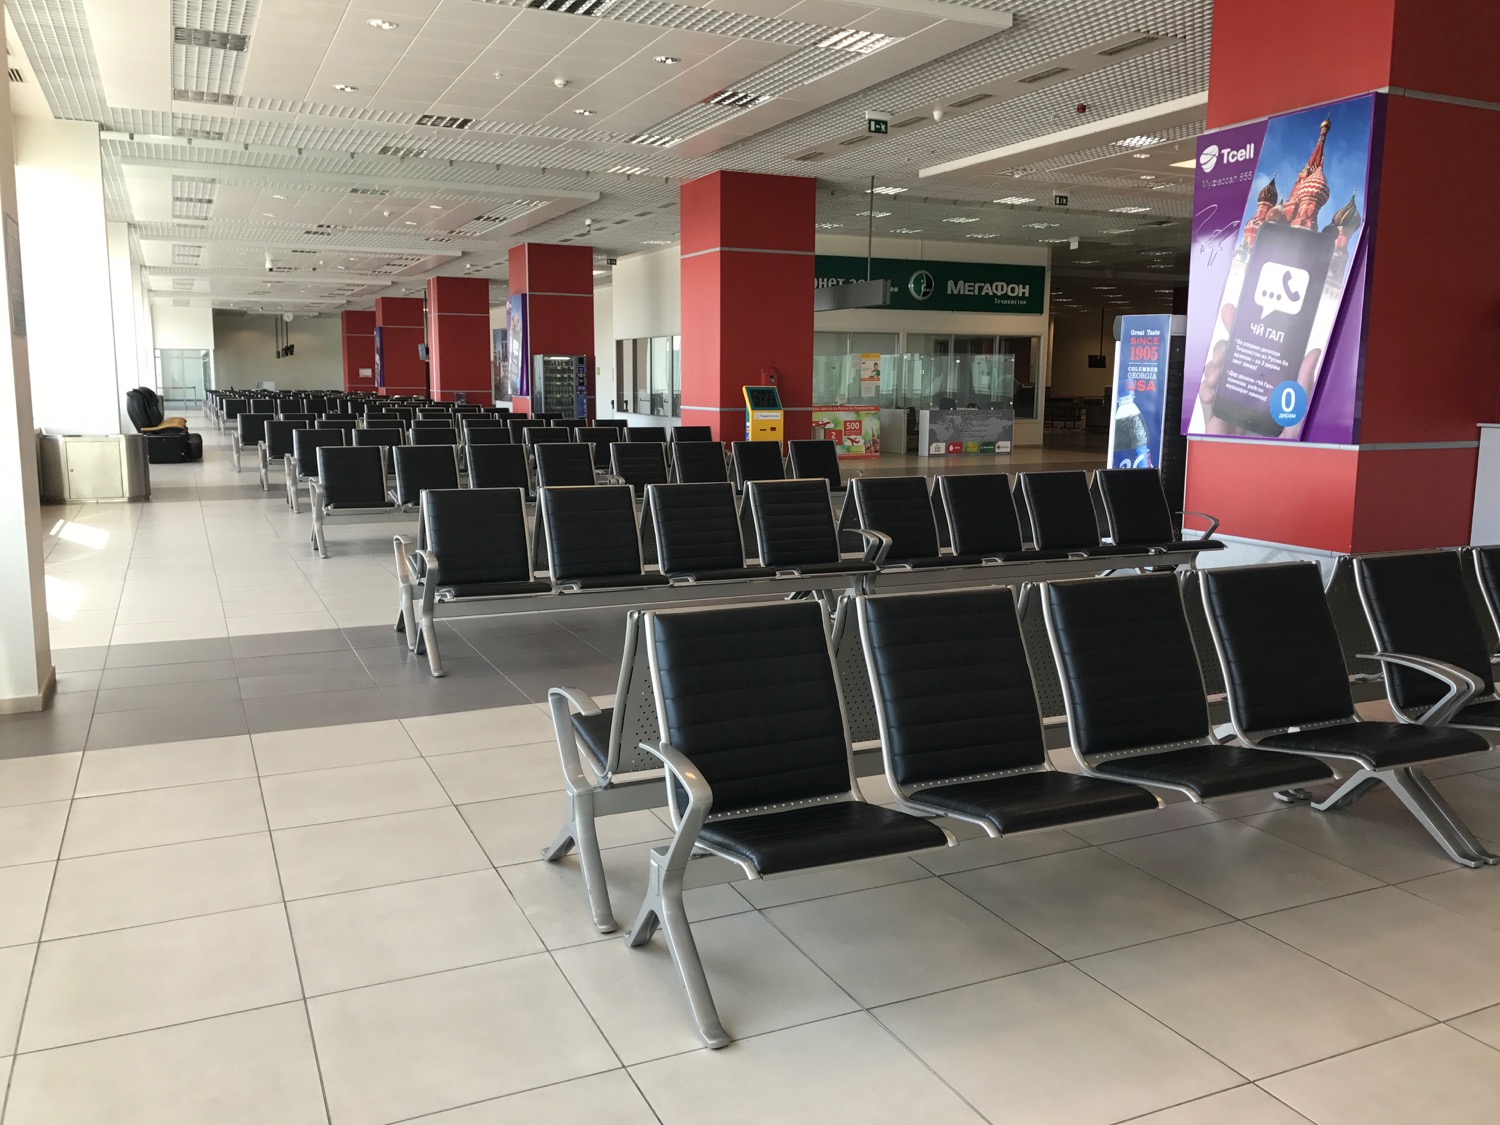 a row of black chairs in a terminal